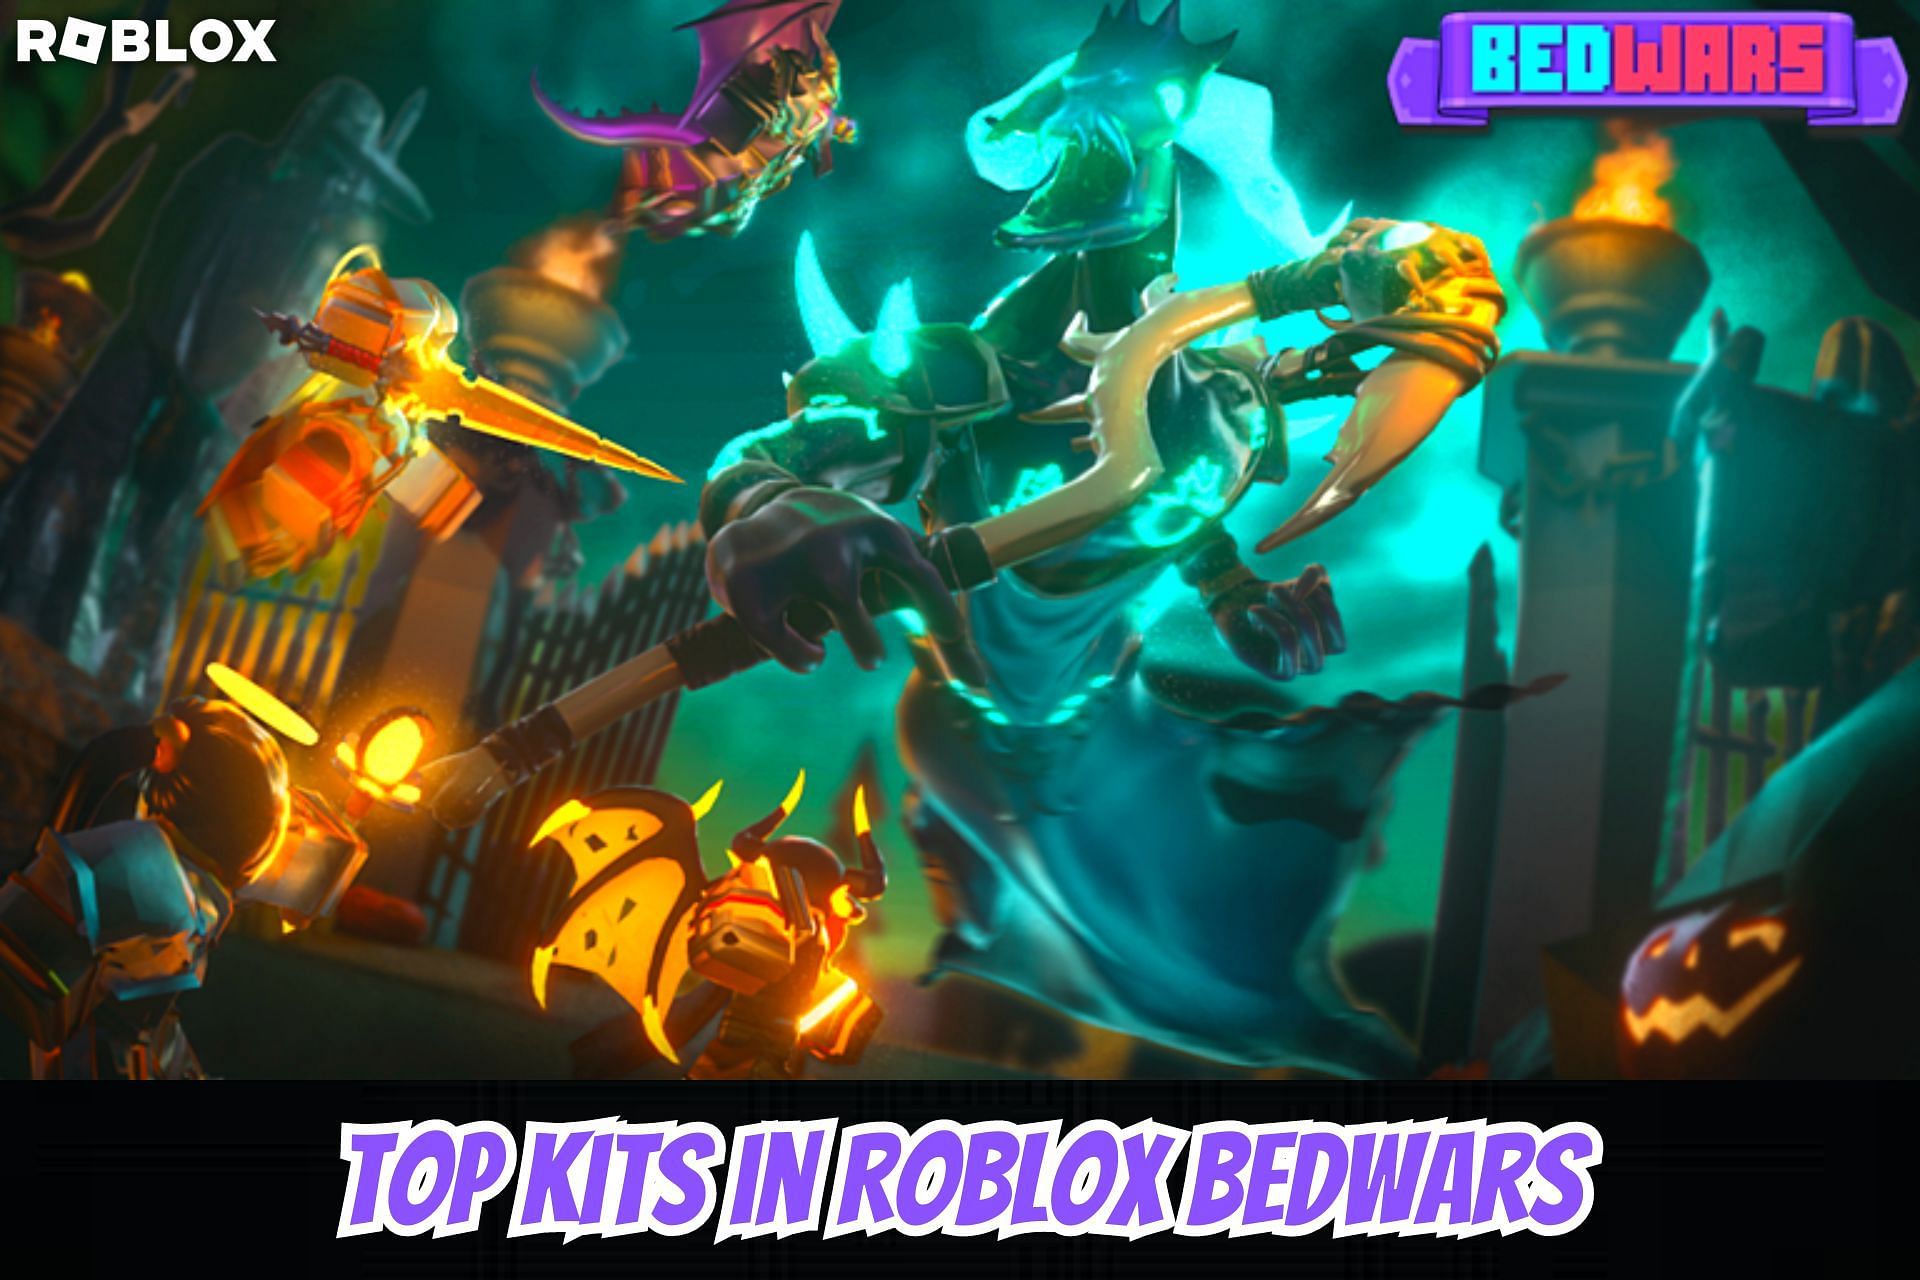 Which is the BEST MOVEMENT KIT in Roblox Bedwars? 